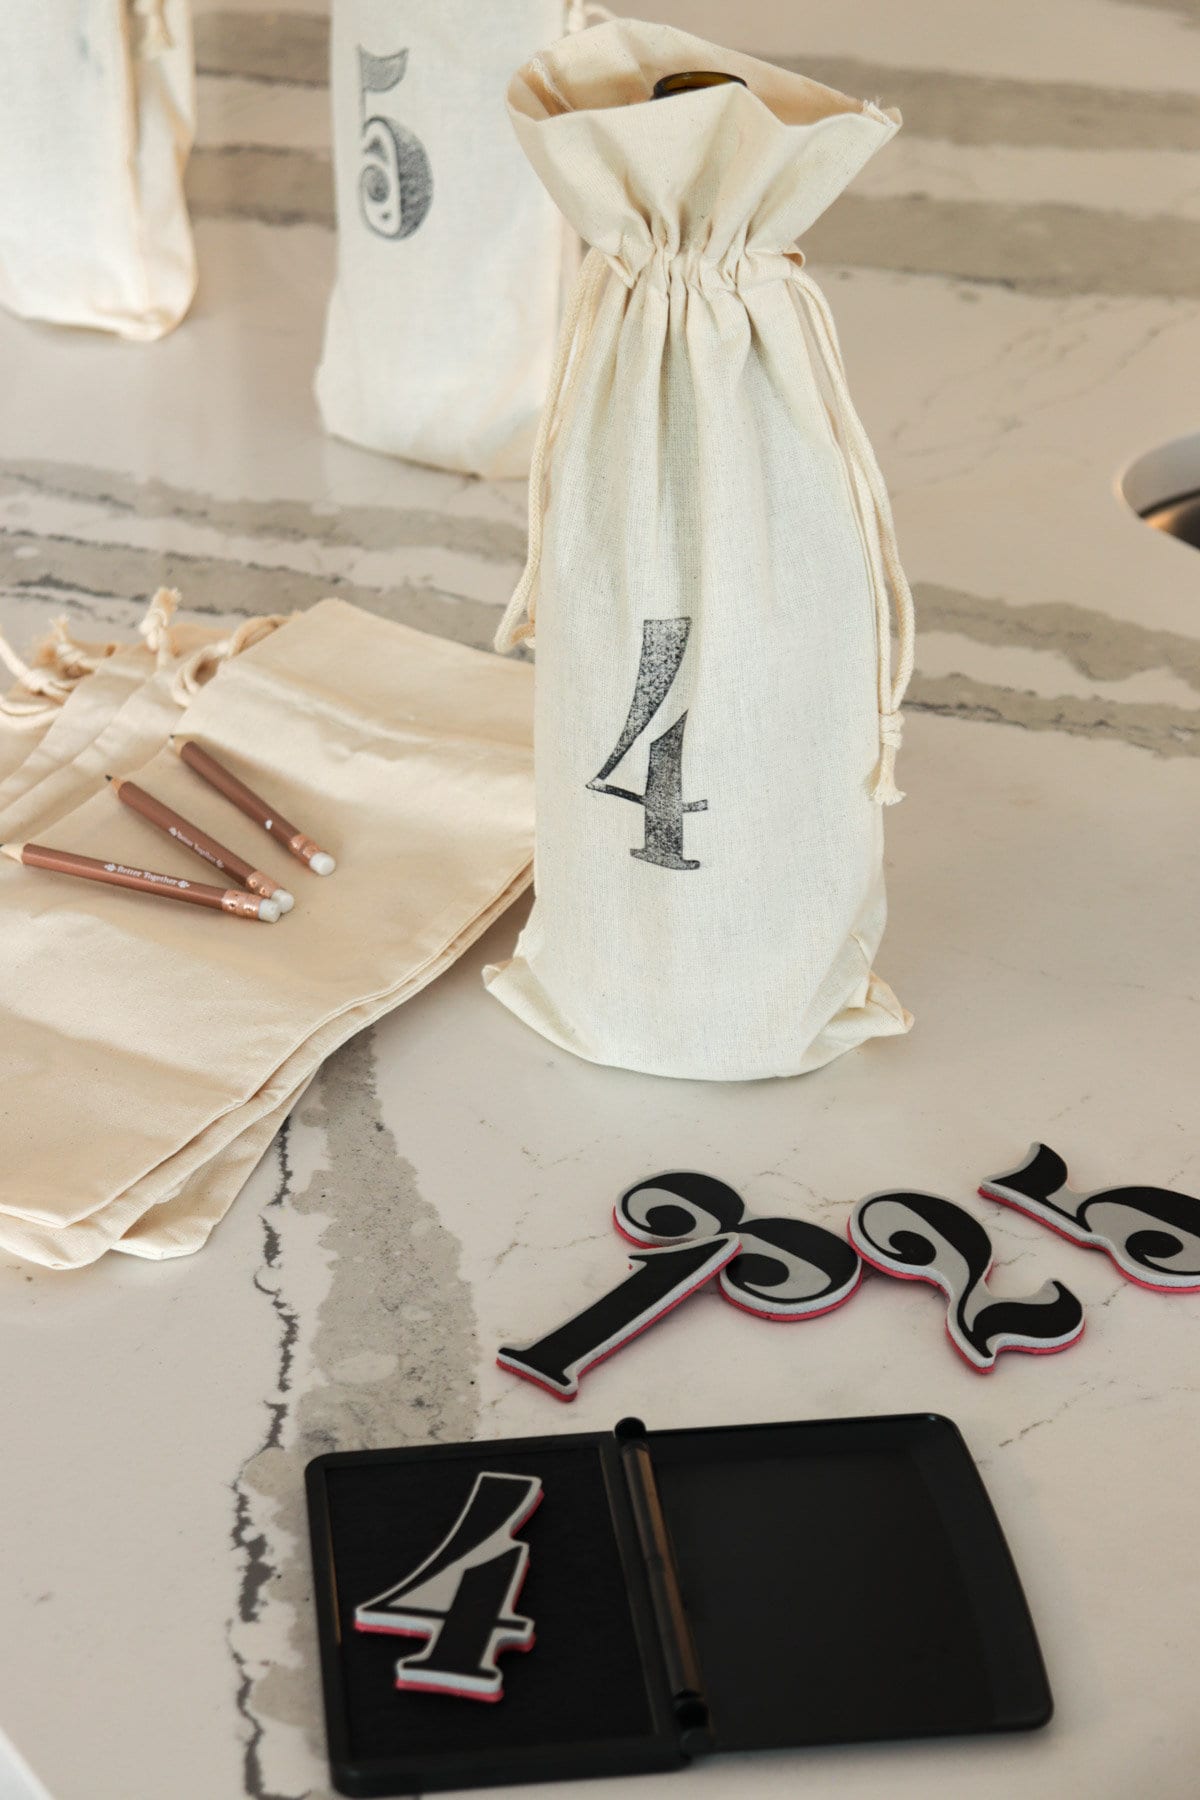 Wine bottle in bag with numbers and stamp.